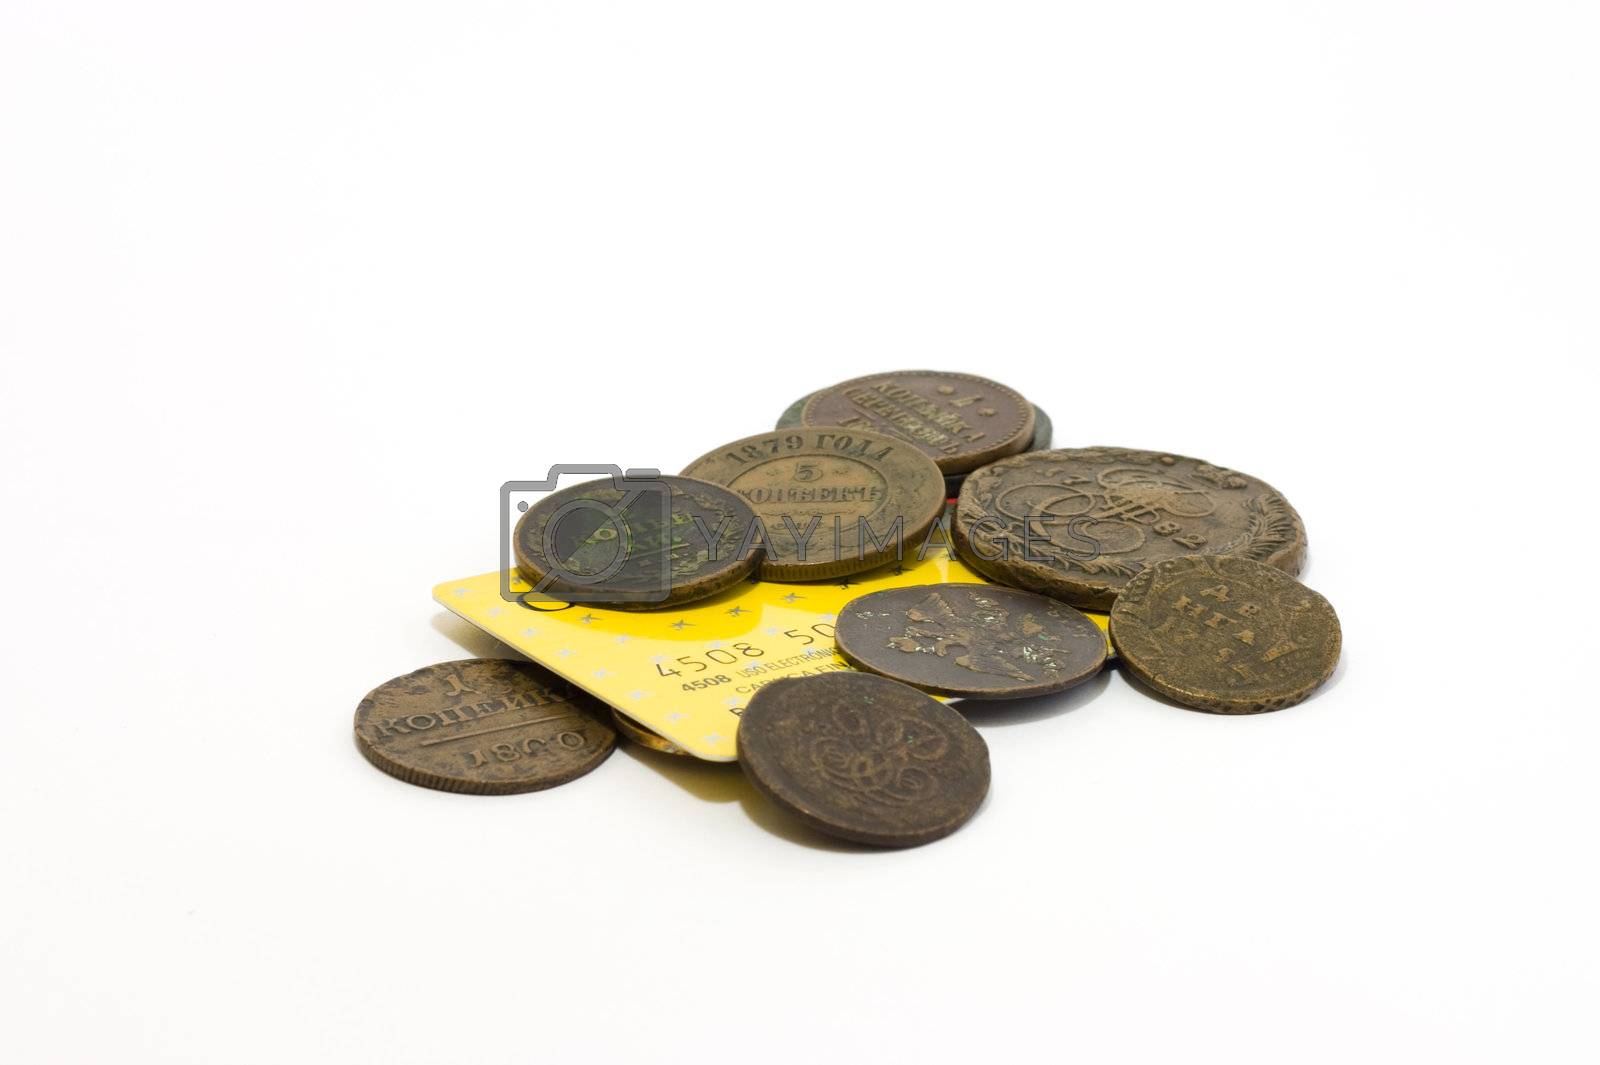 Royalty free image of Credit card and old coins by ursolv